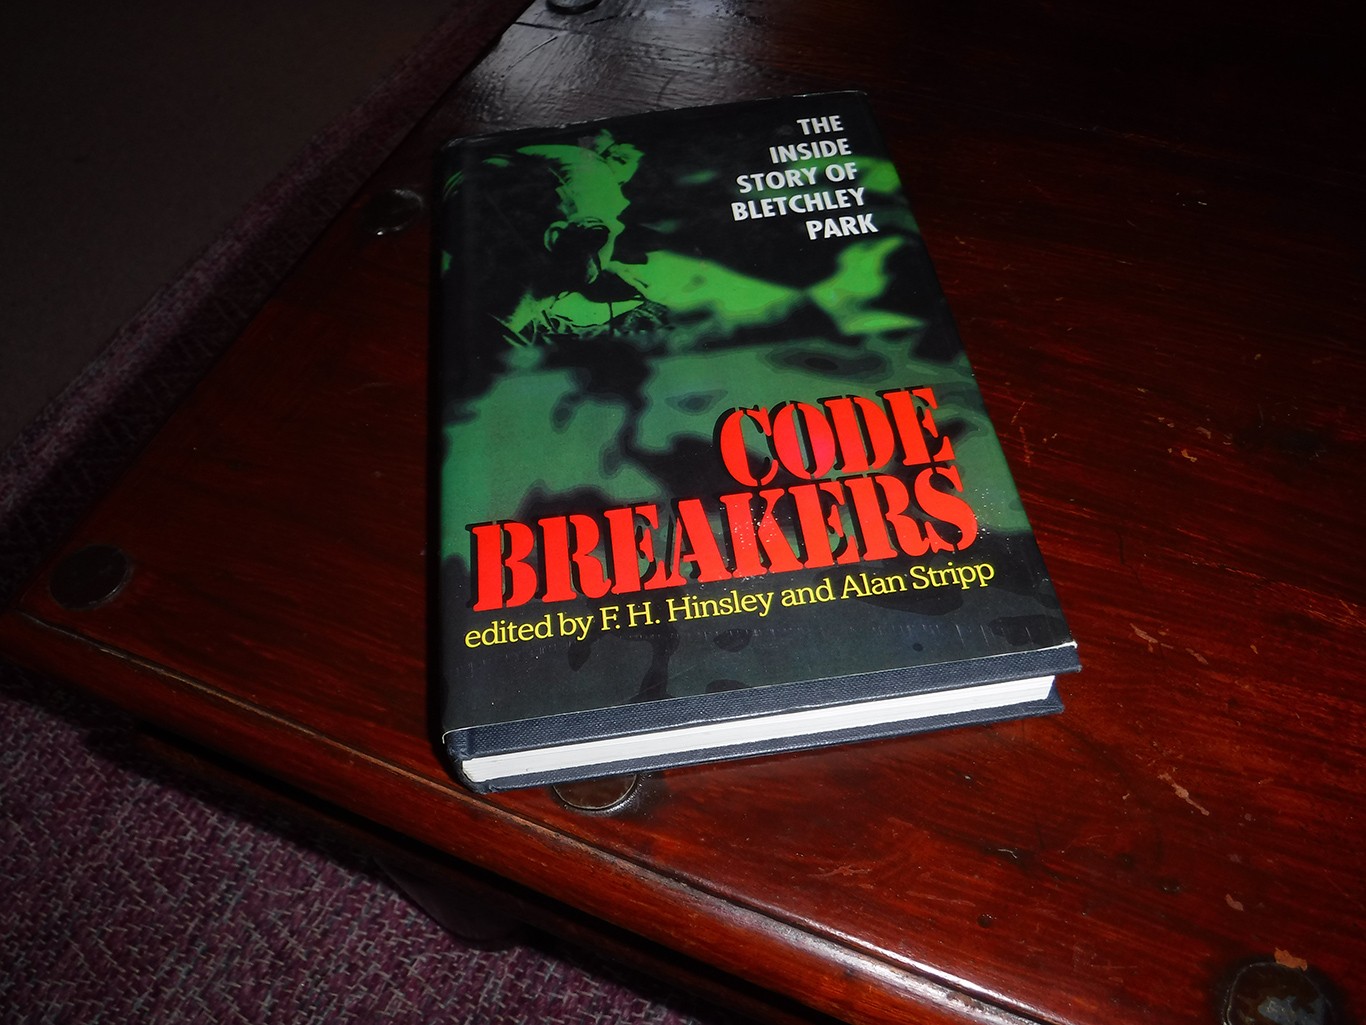 Code Breakers the inside story of bletchley park book by F.H. Hinsley and Alan Stripp